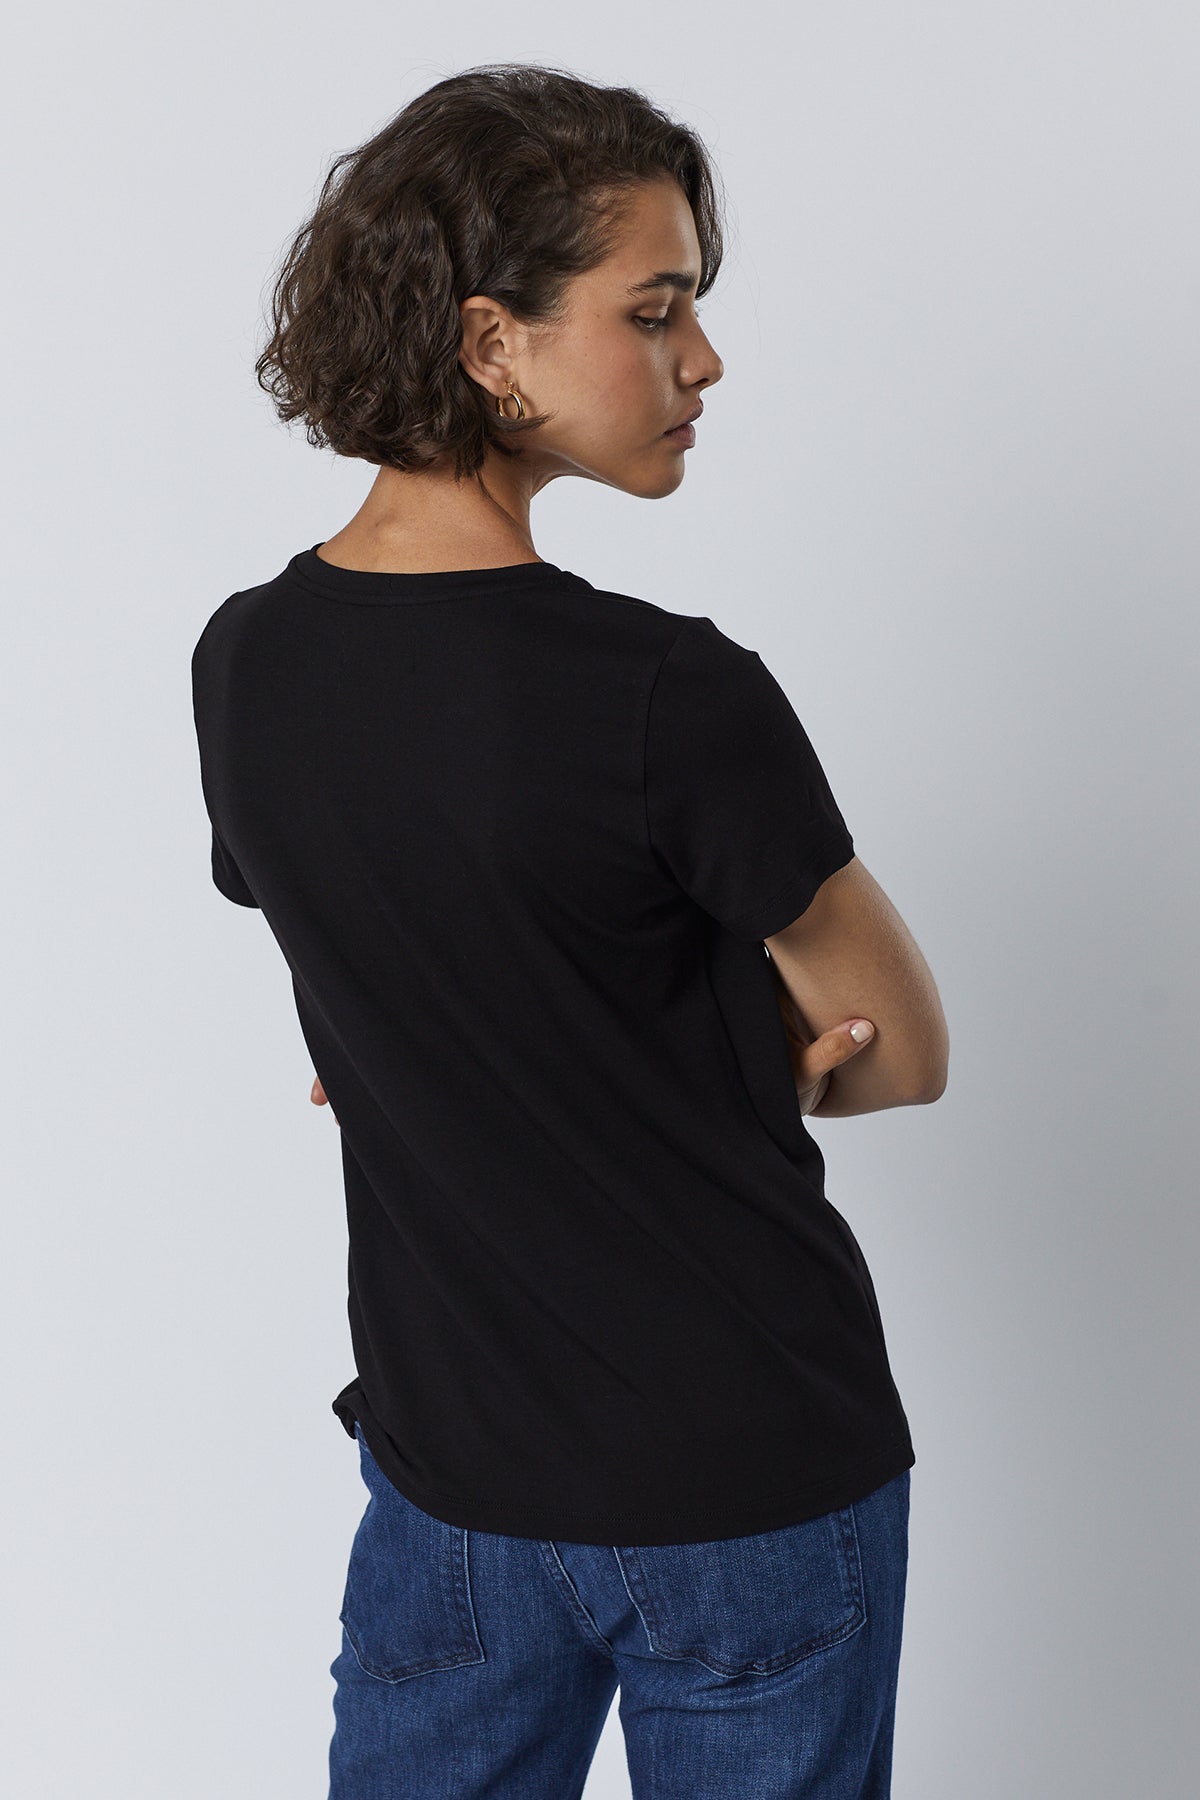 Runyon Tee in black with blue denim back-26007207248065